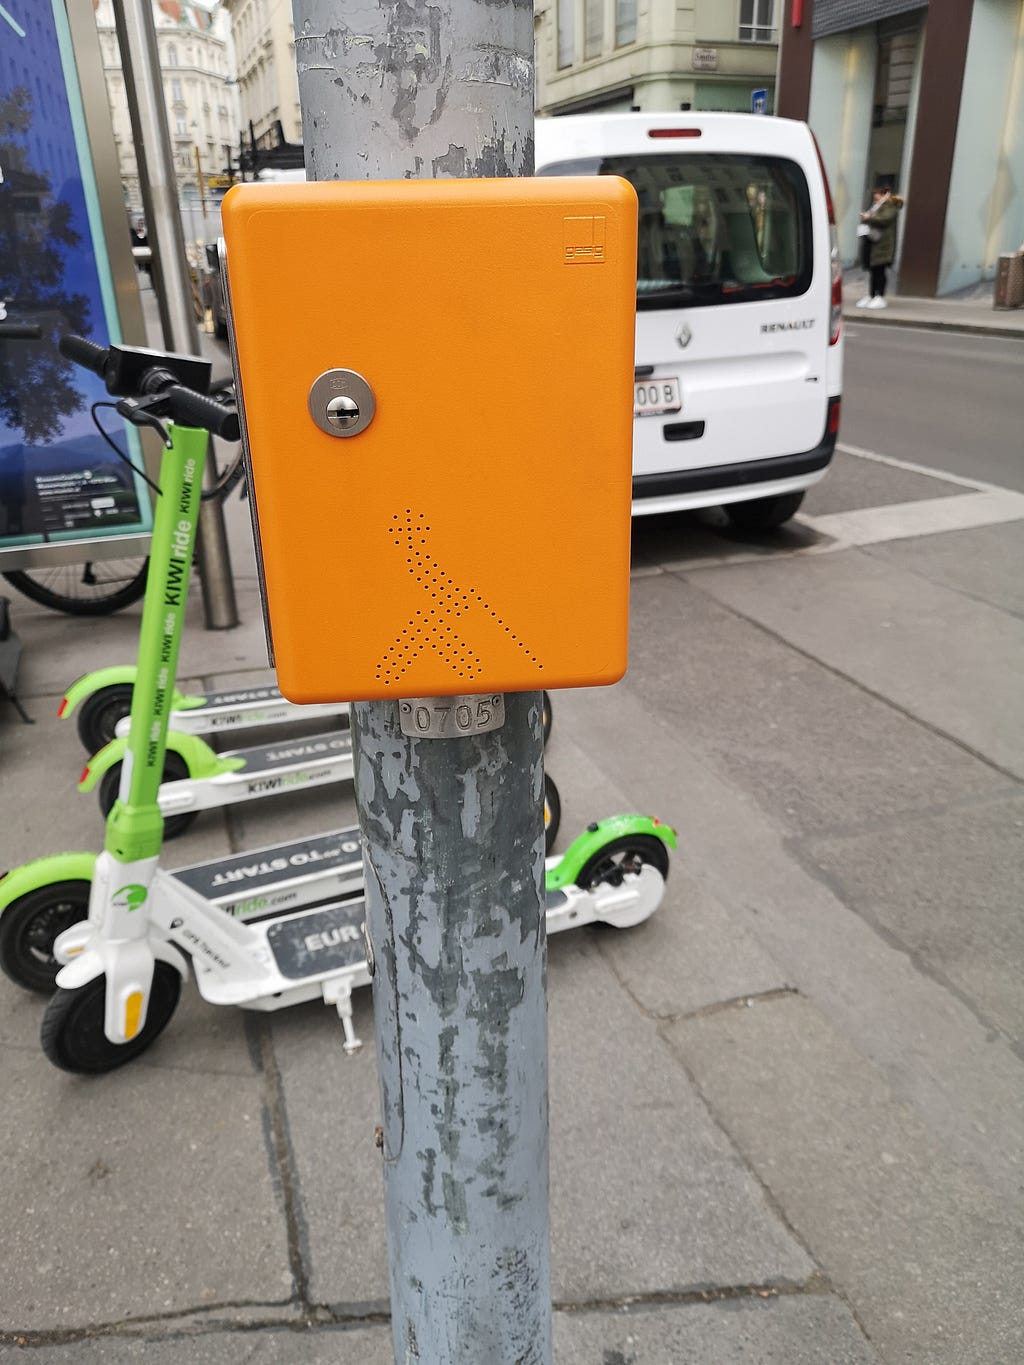 Other machine to help pedestrians in the traffic light on the street with a symbol of blind people.